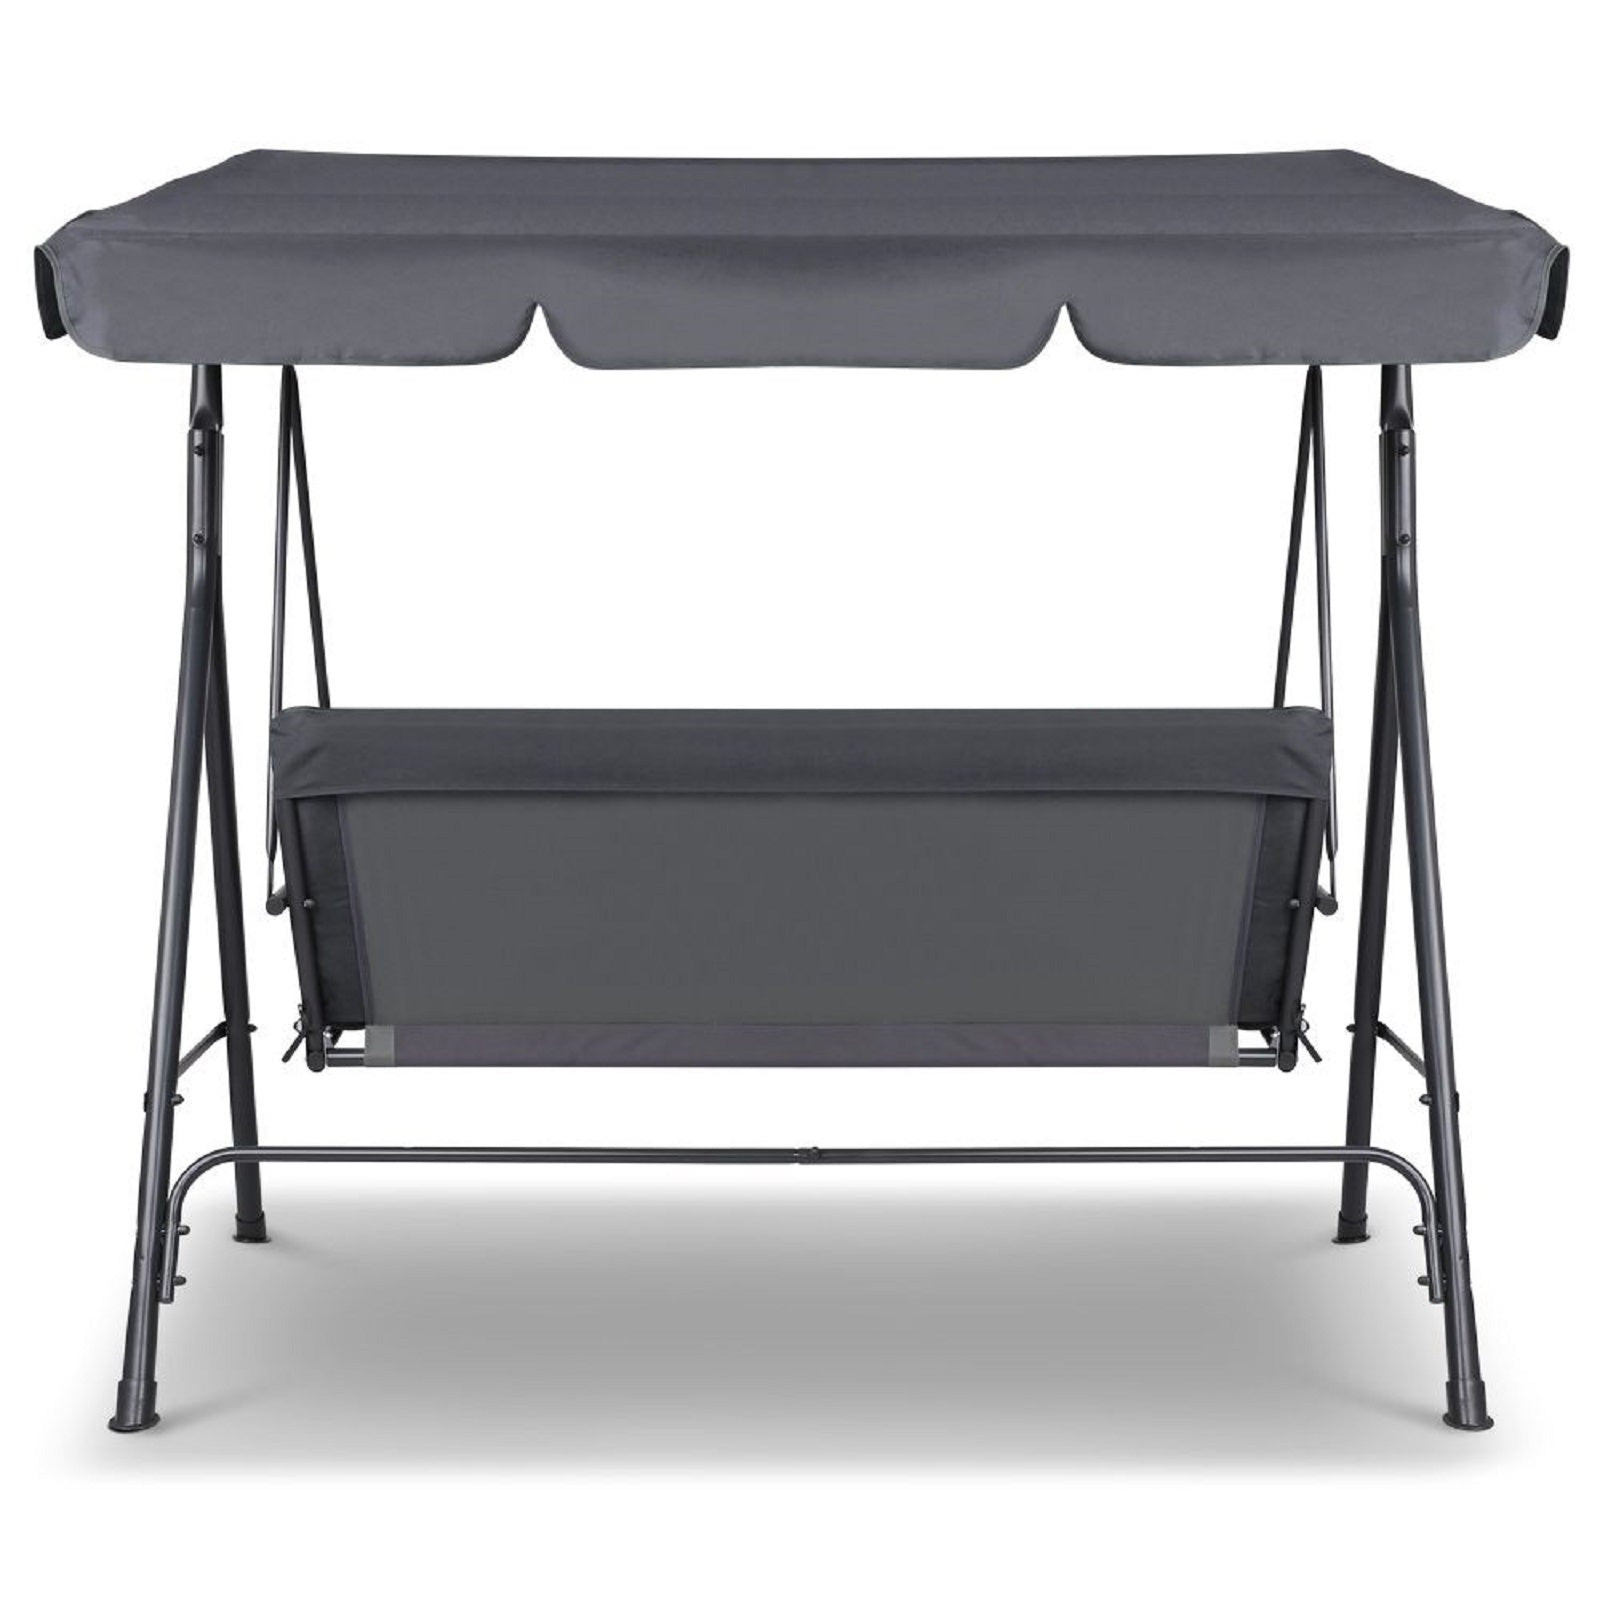 Milano Outdoor Swing Bench Seat Chair Canopy Furniture 3 Seater Garden Hammock - Grey - image5